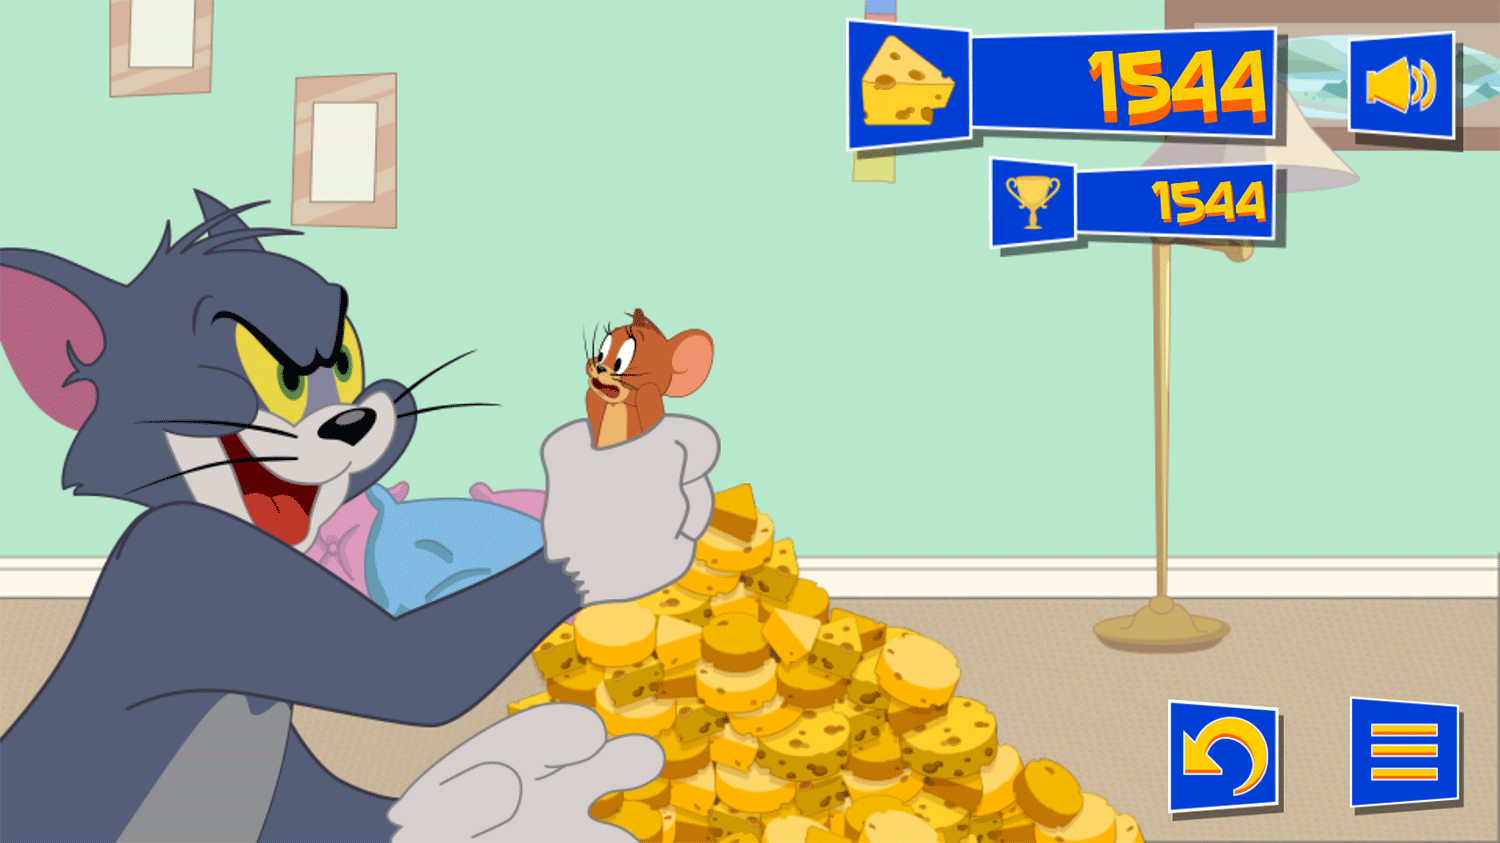 The Tom and Jerry Cheese Swipe Results Screenshots.